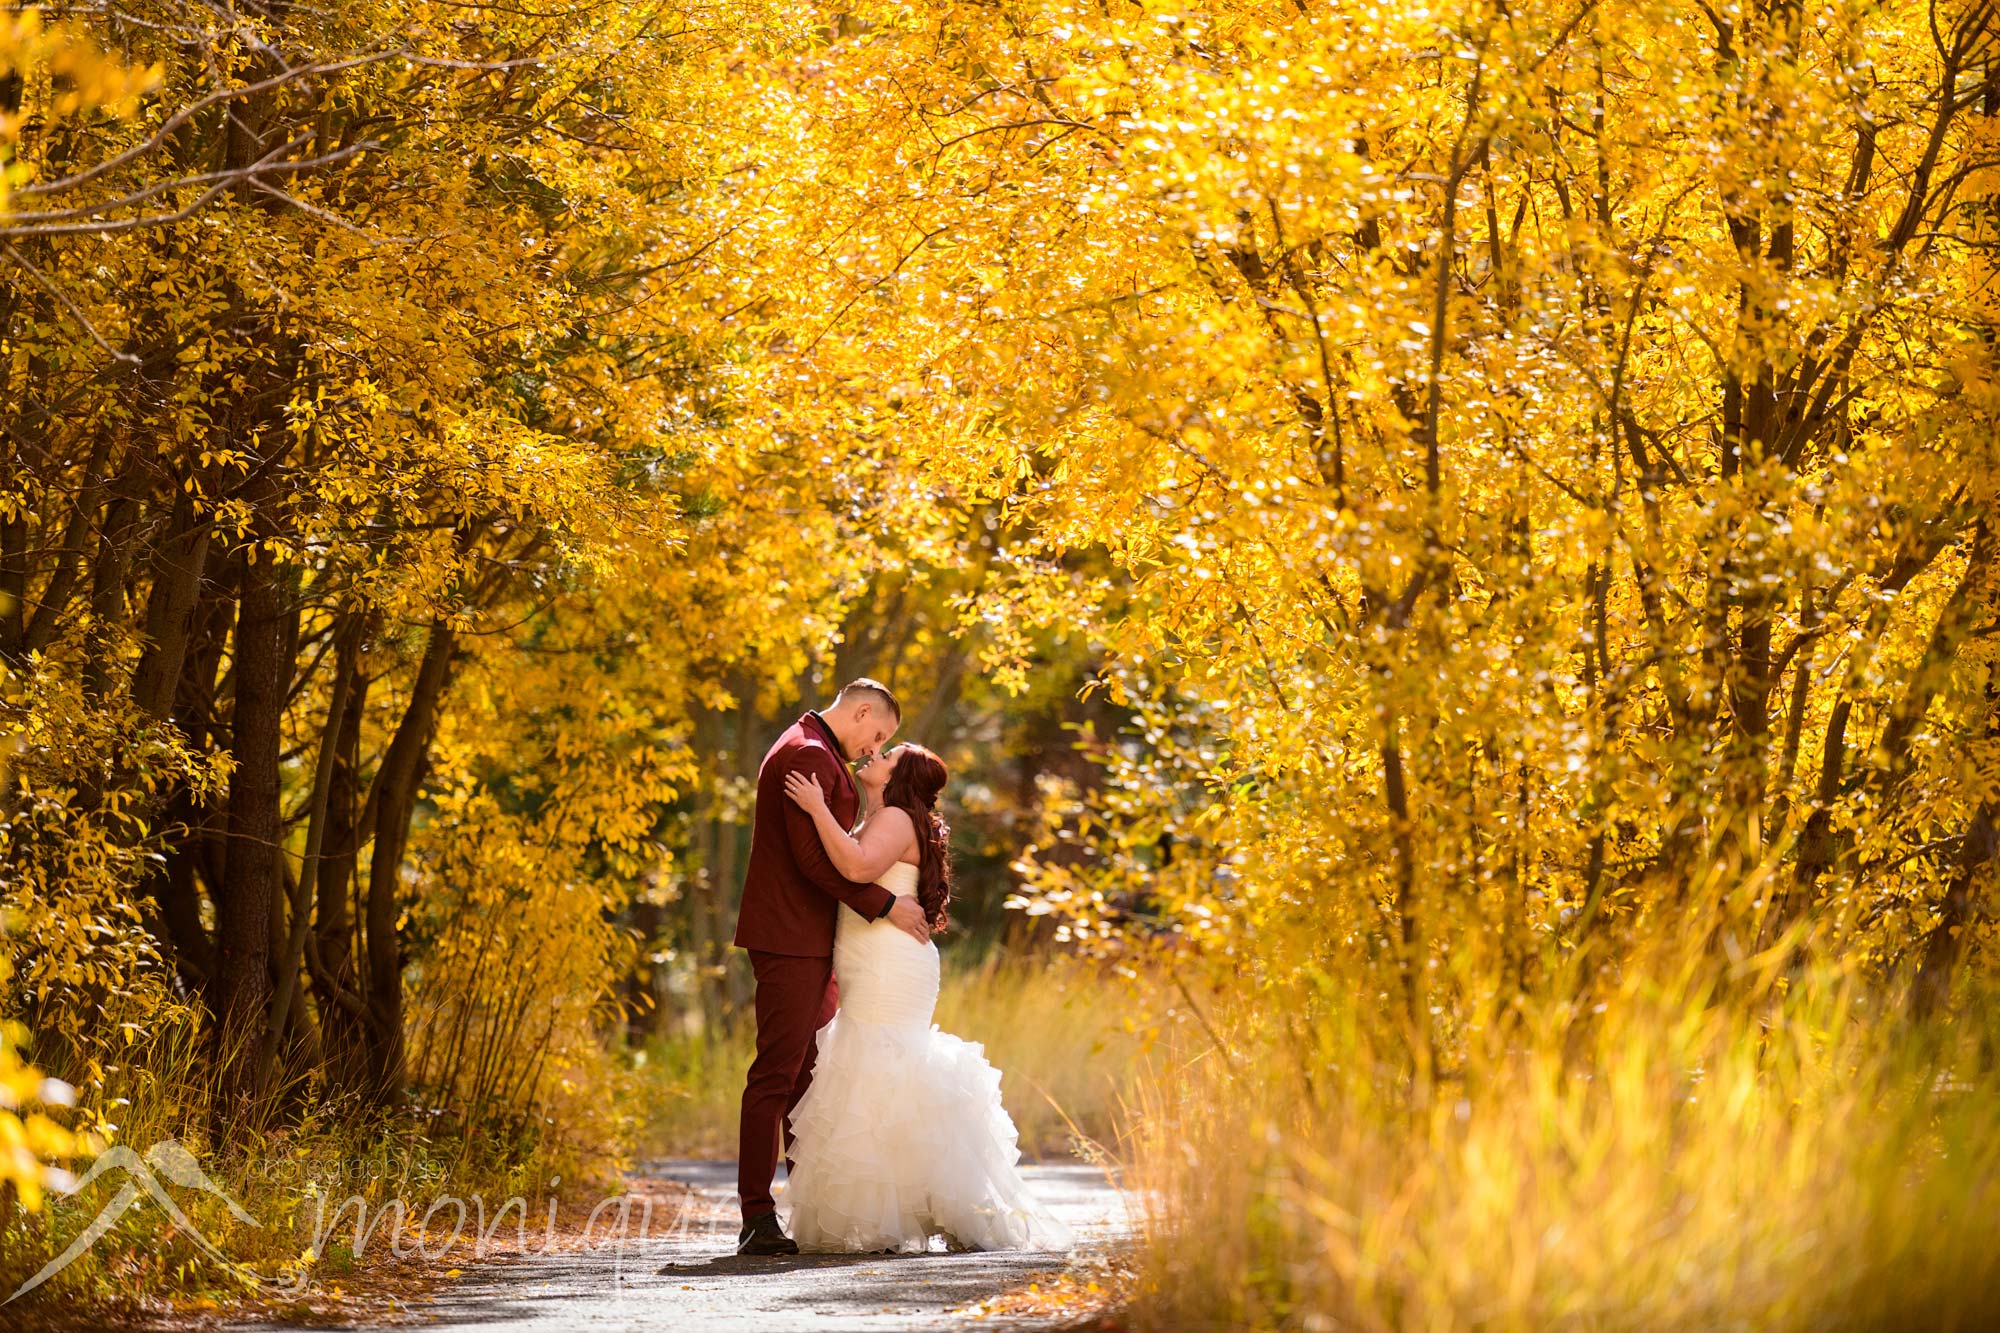 Valhalla Tahoe wedding photography with the fall colors all around the bride and groom